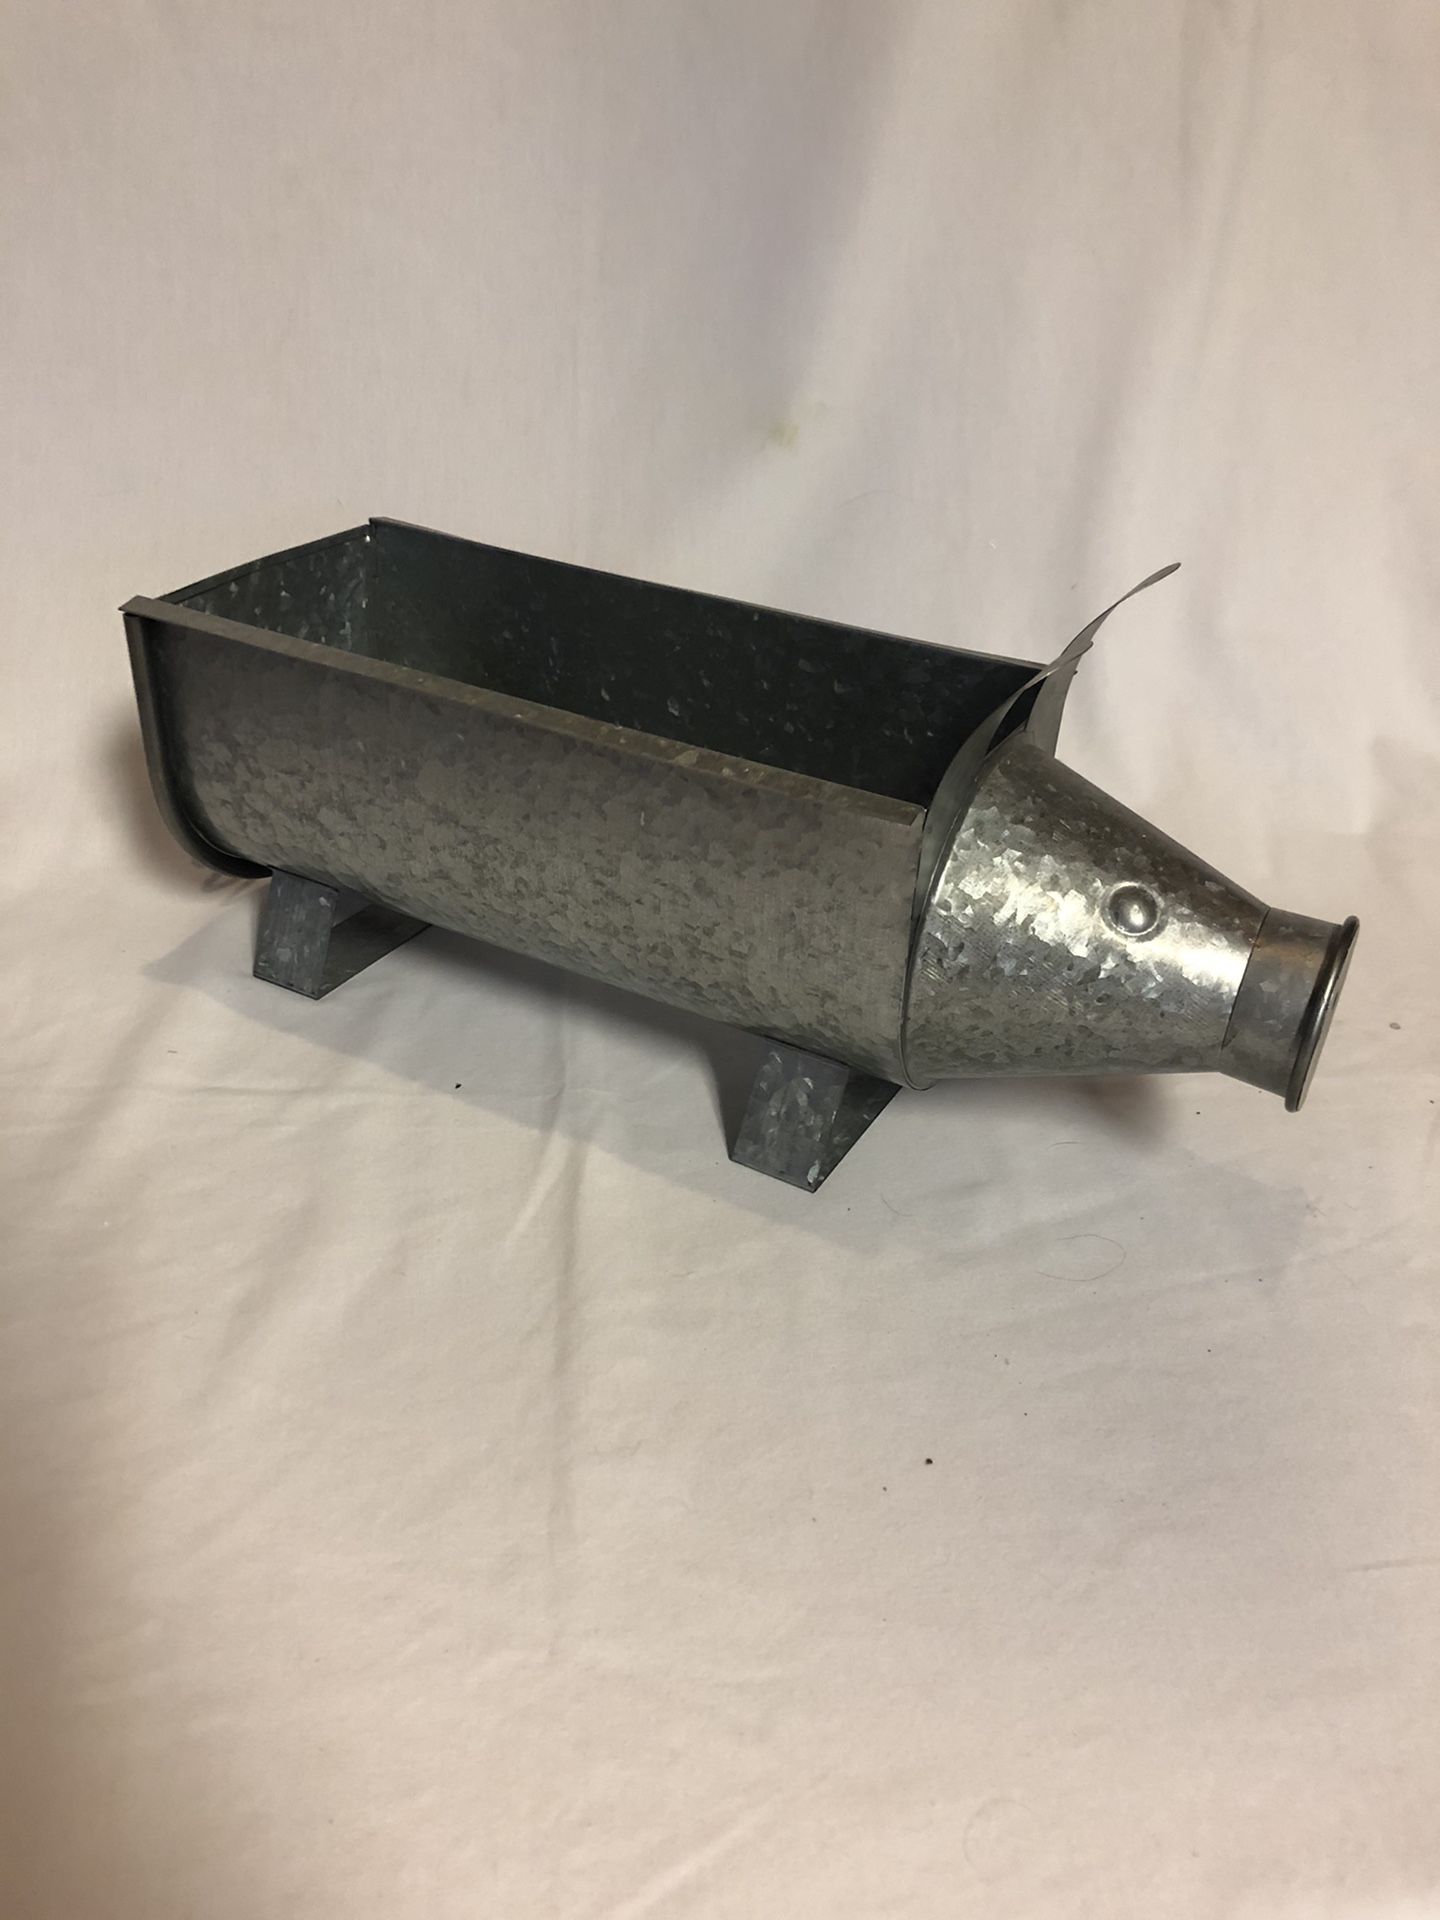 Galvanized Pig Planter Or Container For Anything !